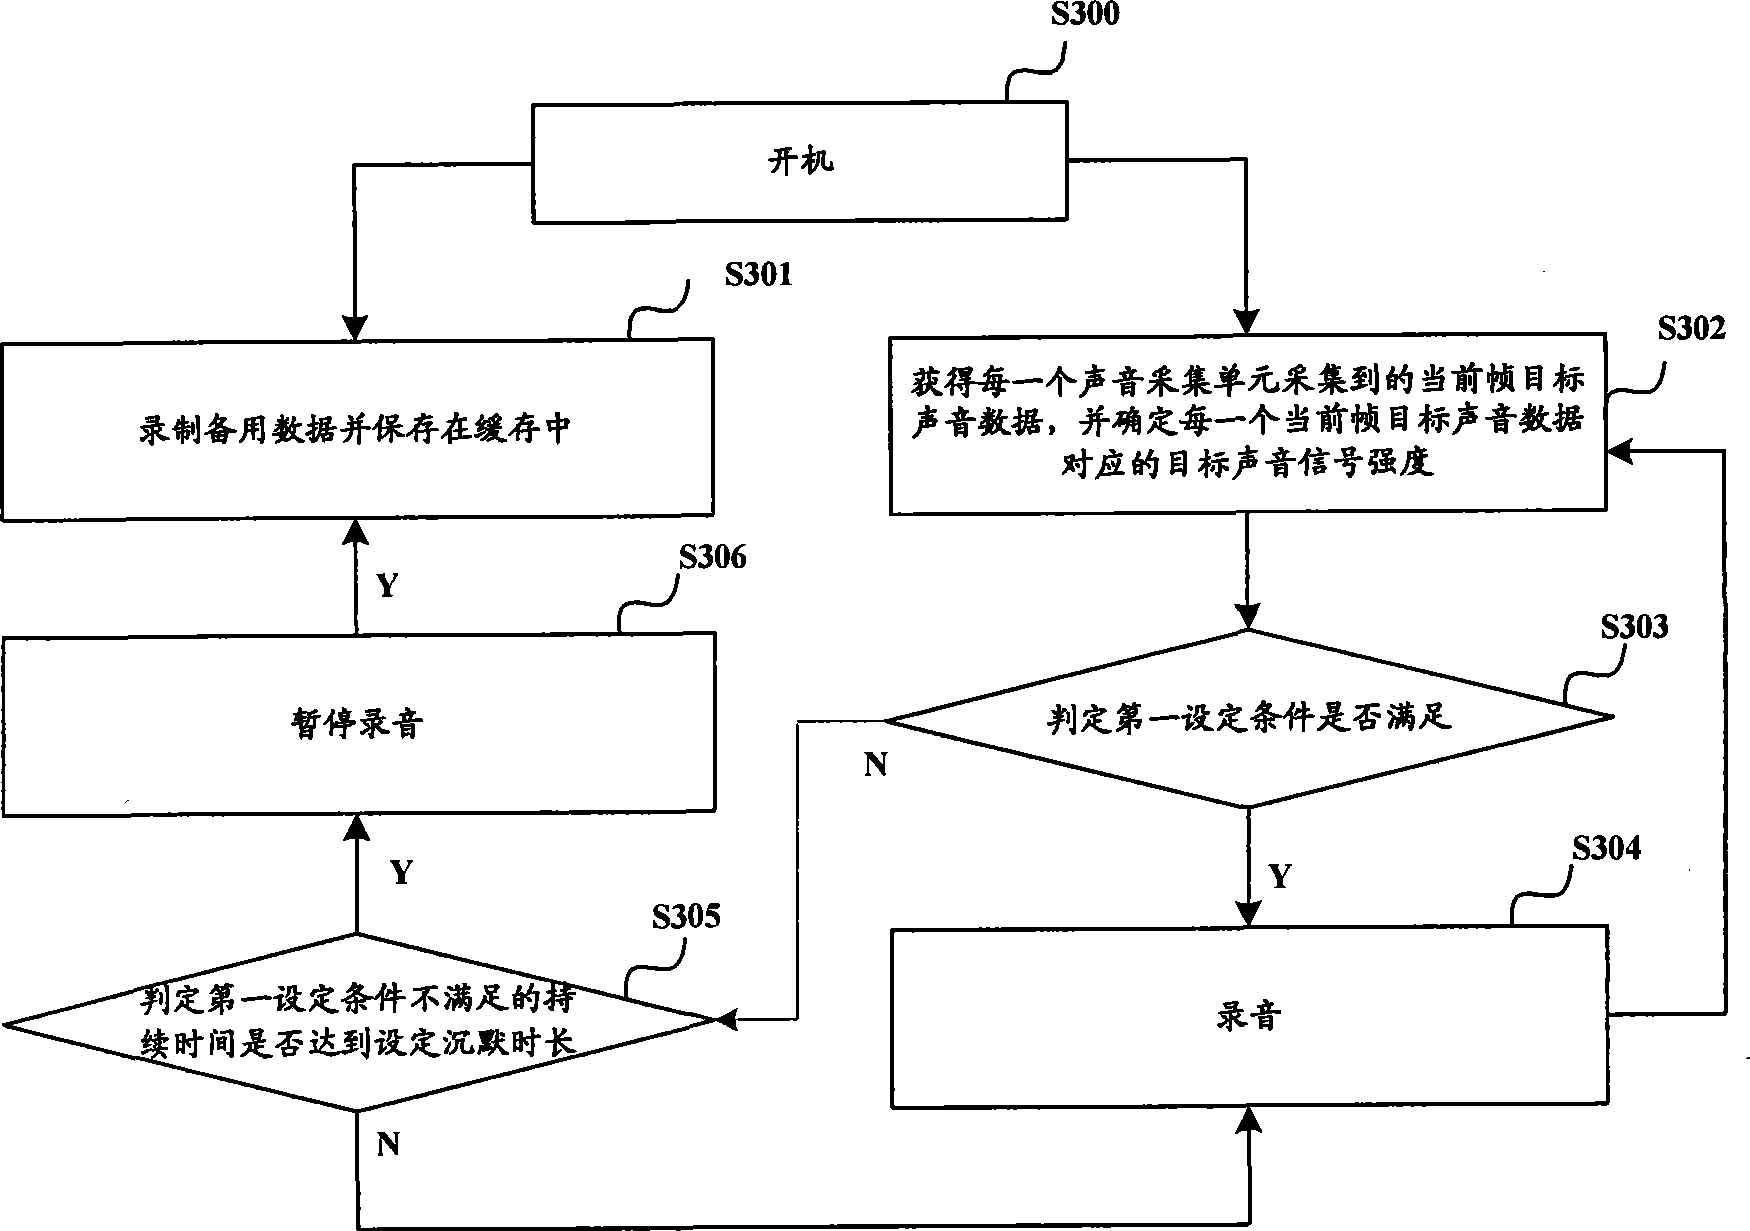 Sound recording control method and sound recording device